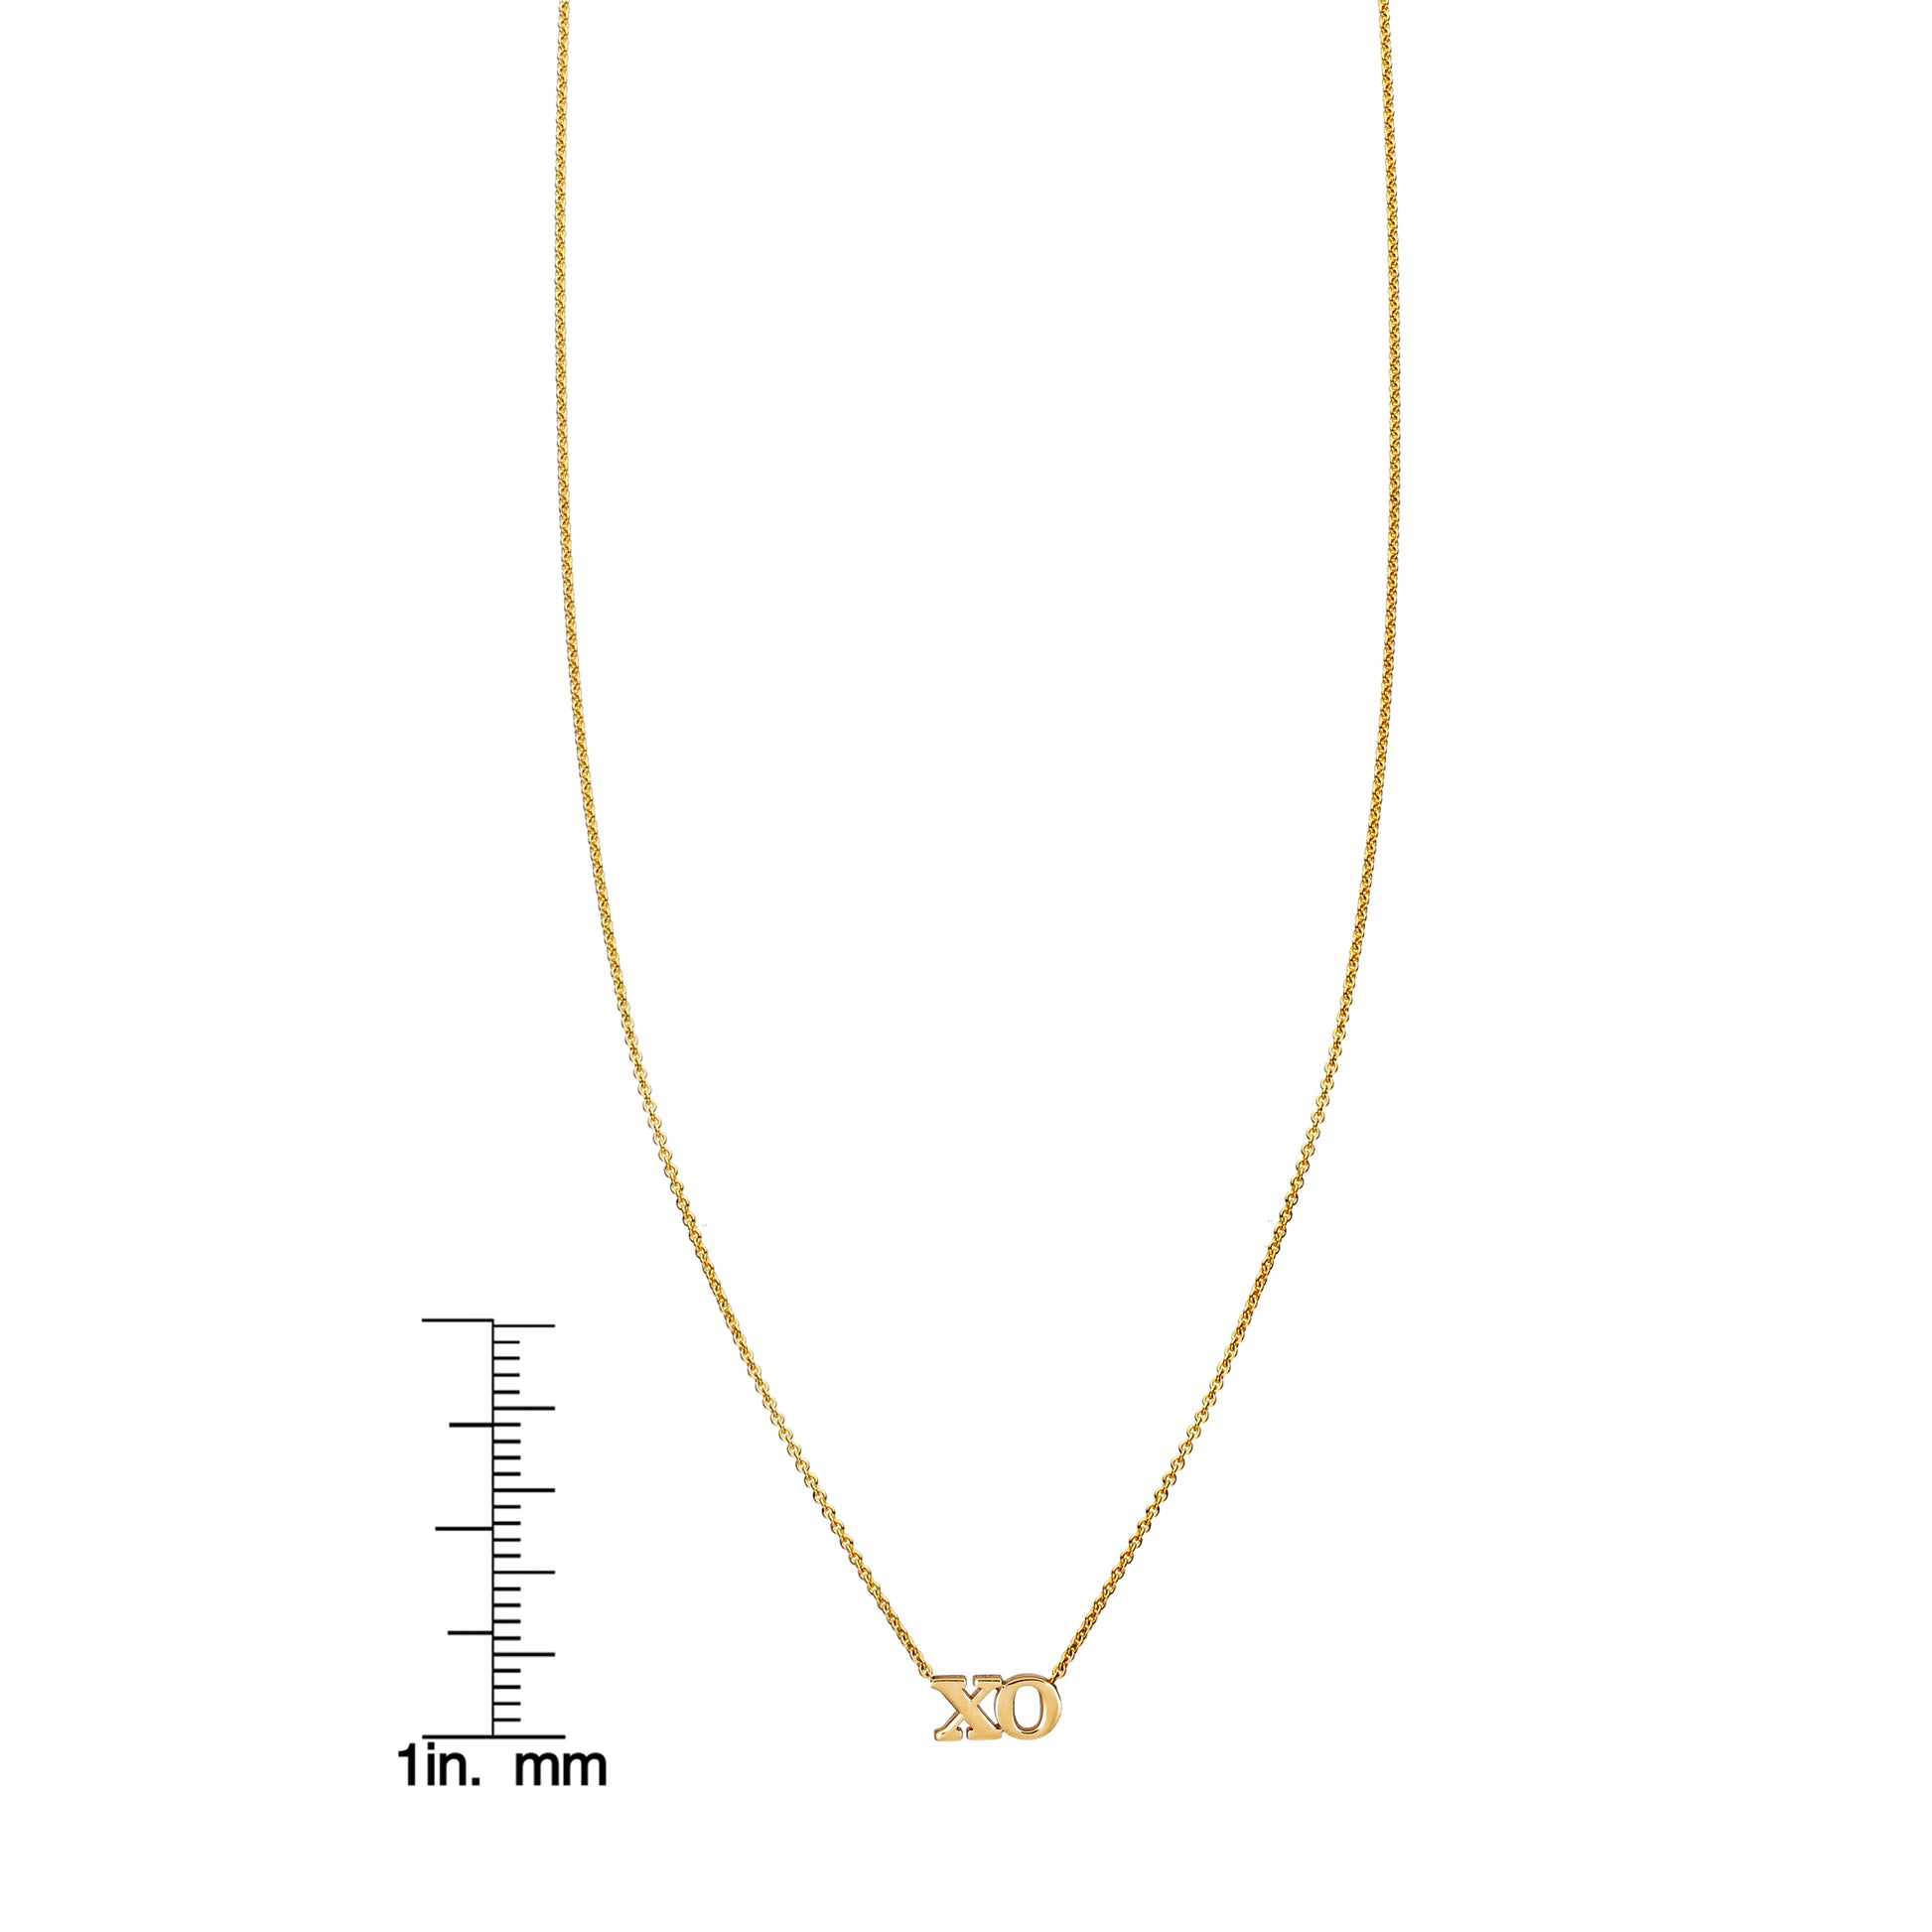 gold xo necklace with ruler